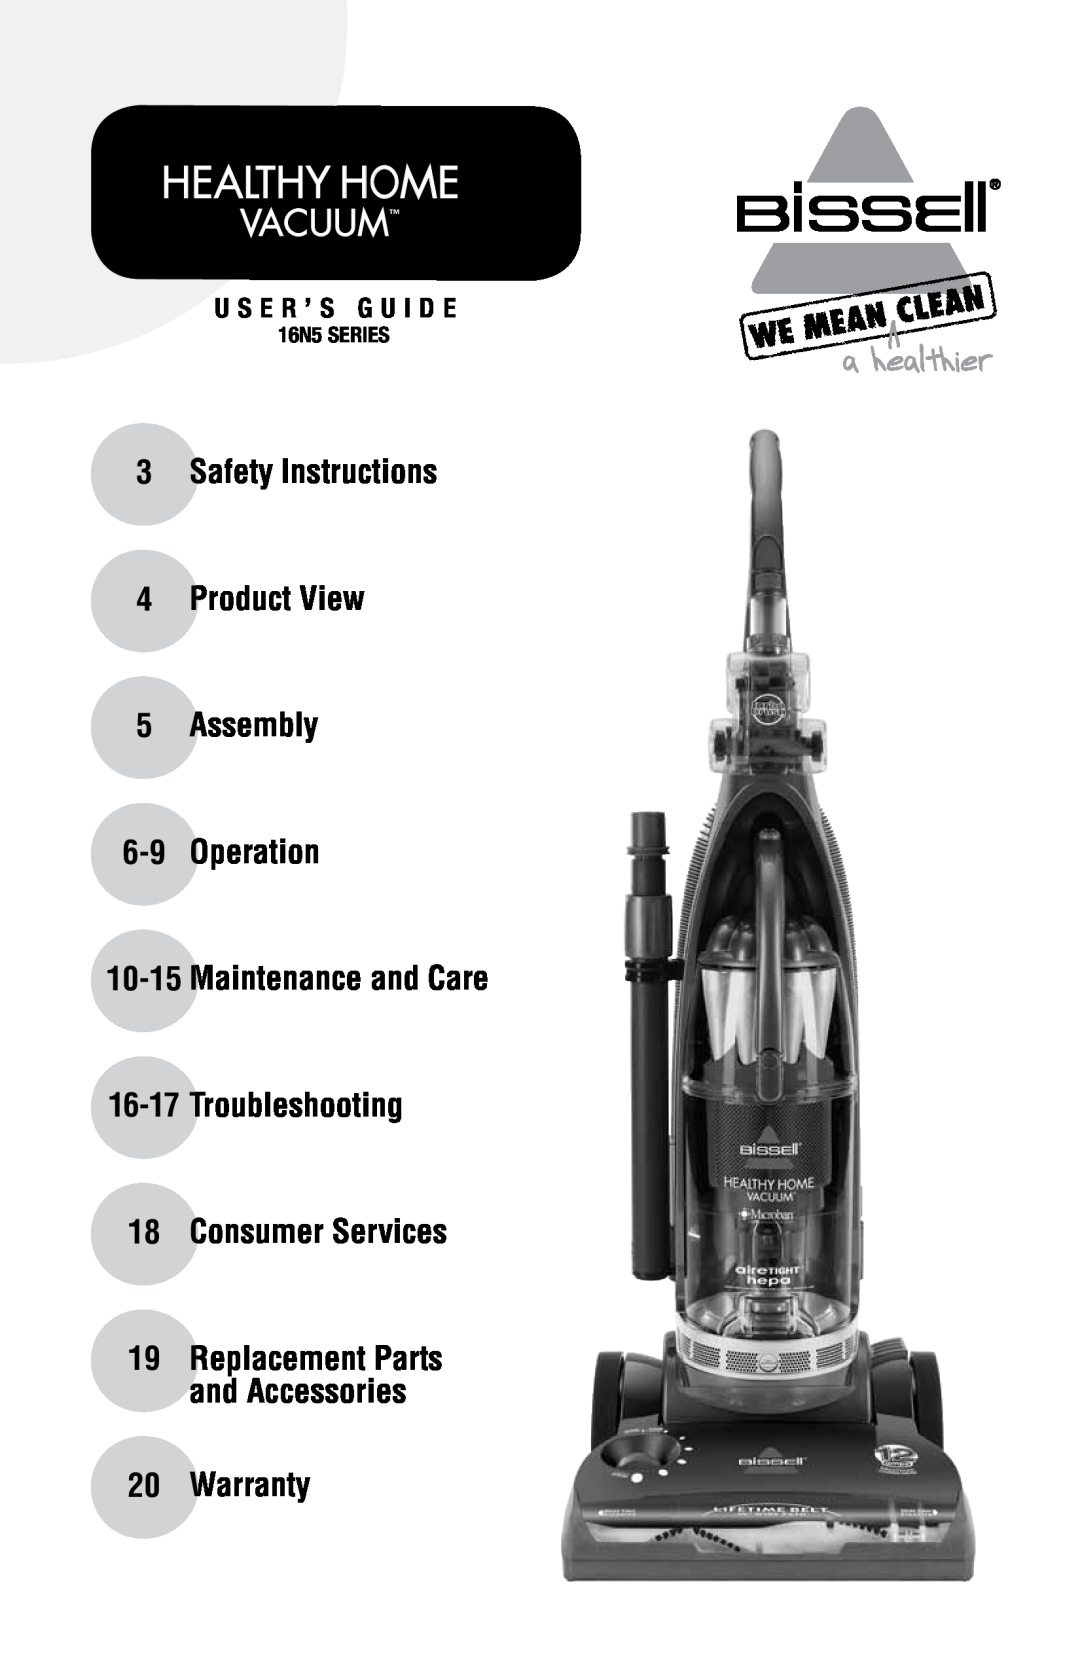 Bissell 16N5 warranty Safety Instructions 4 Product View 5 Assembly 6-9 Operation, Warranty, U S E R ’ S G U I D E, Vacuum 